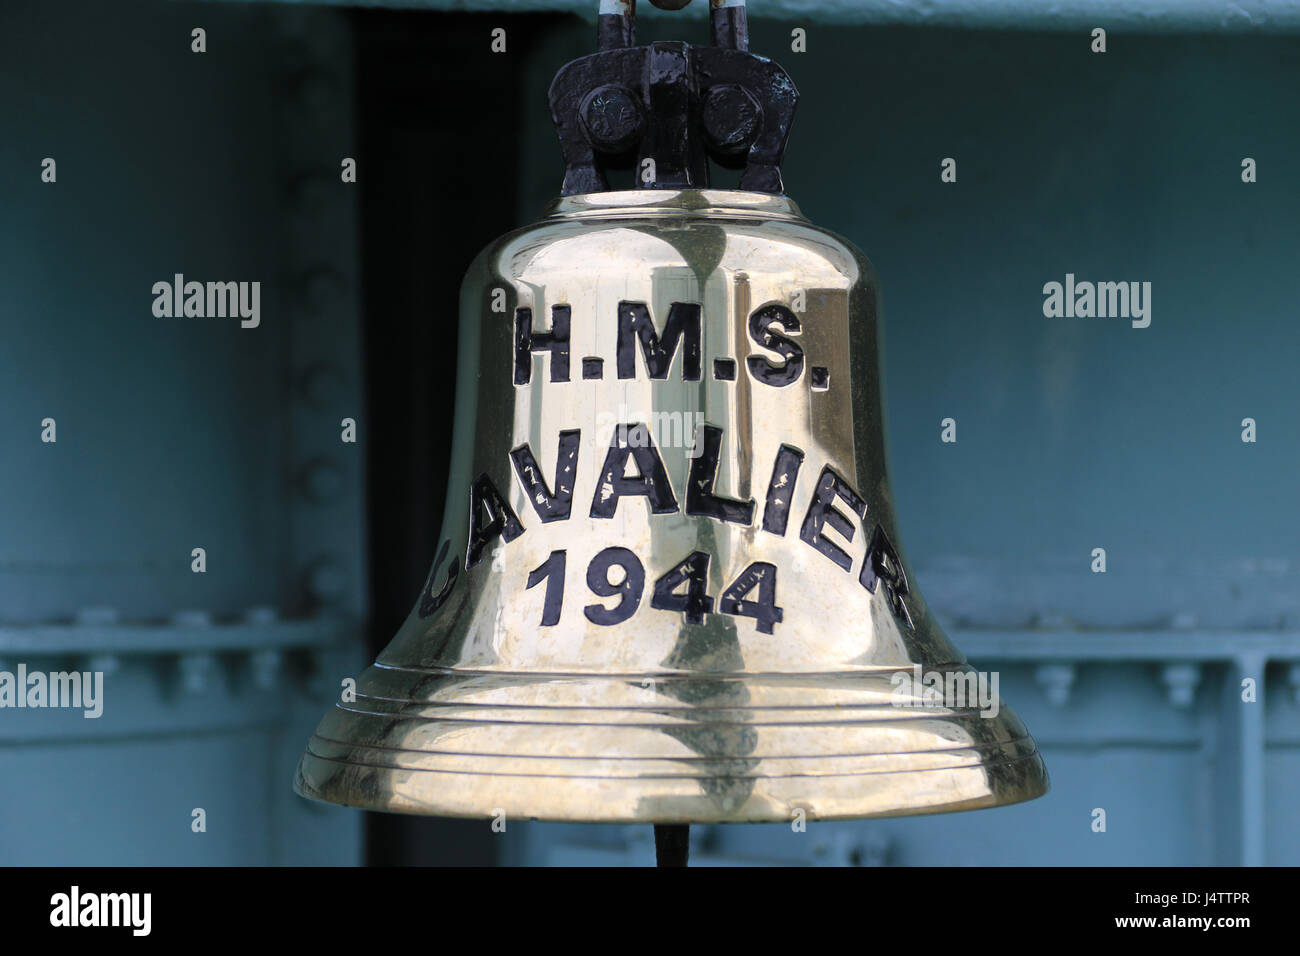 The main bell from HMS Cavalier which is a retired C-class destroyer of the Royal Navy. She was laid down by J. Samuel White and Company at East Cowes on 28 March 1943, launched on 7 April 1944,[1] and commissioned on 22 November 1944.[3] She served in World War II and in various commissions in the Far East until she was decommissioned in 1972. After decommissioning she was preserved as a museum ship and currently resides at Chatham Historic Dockyard. Stock Photo